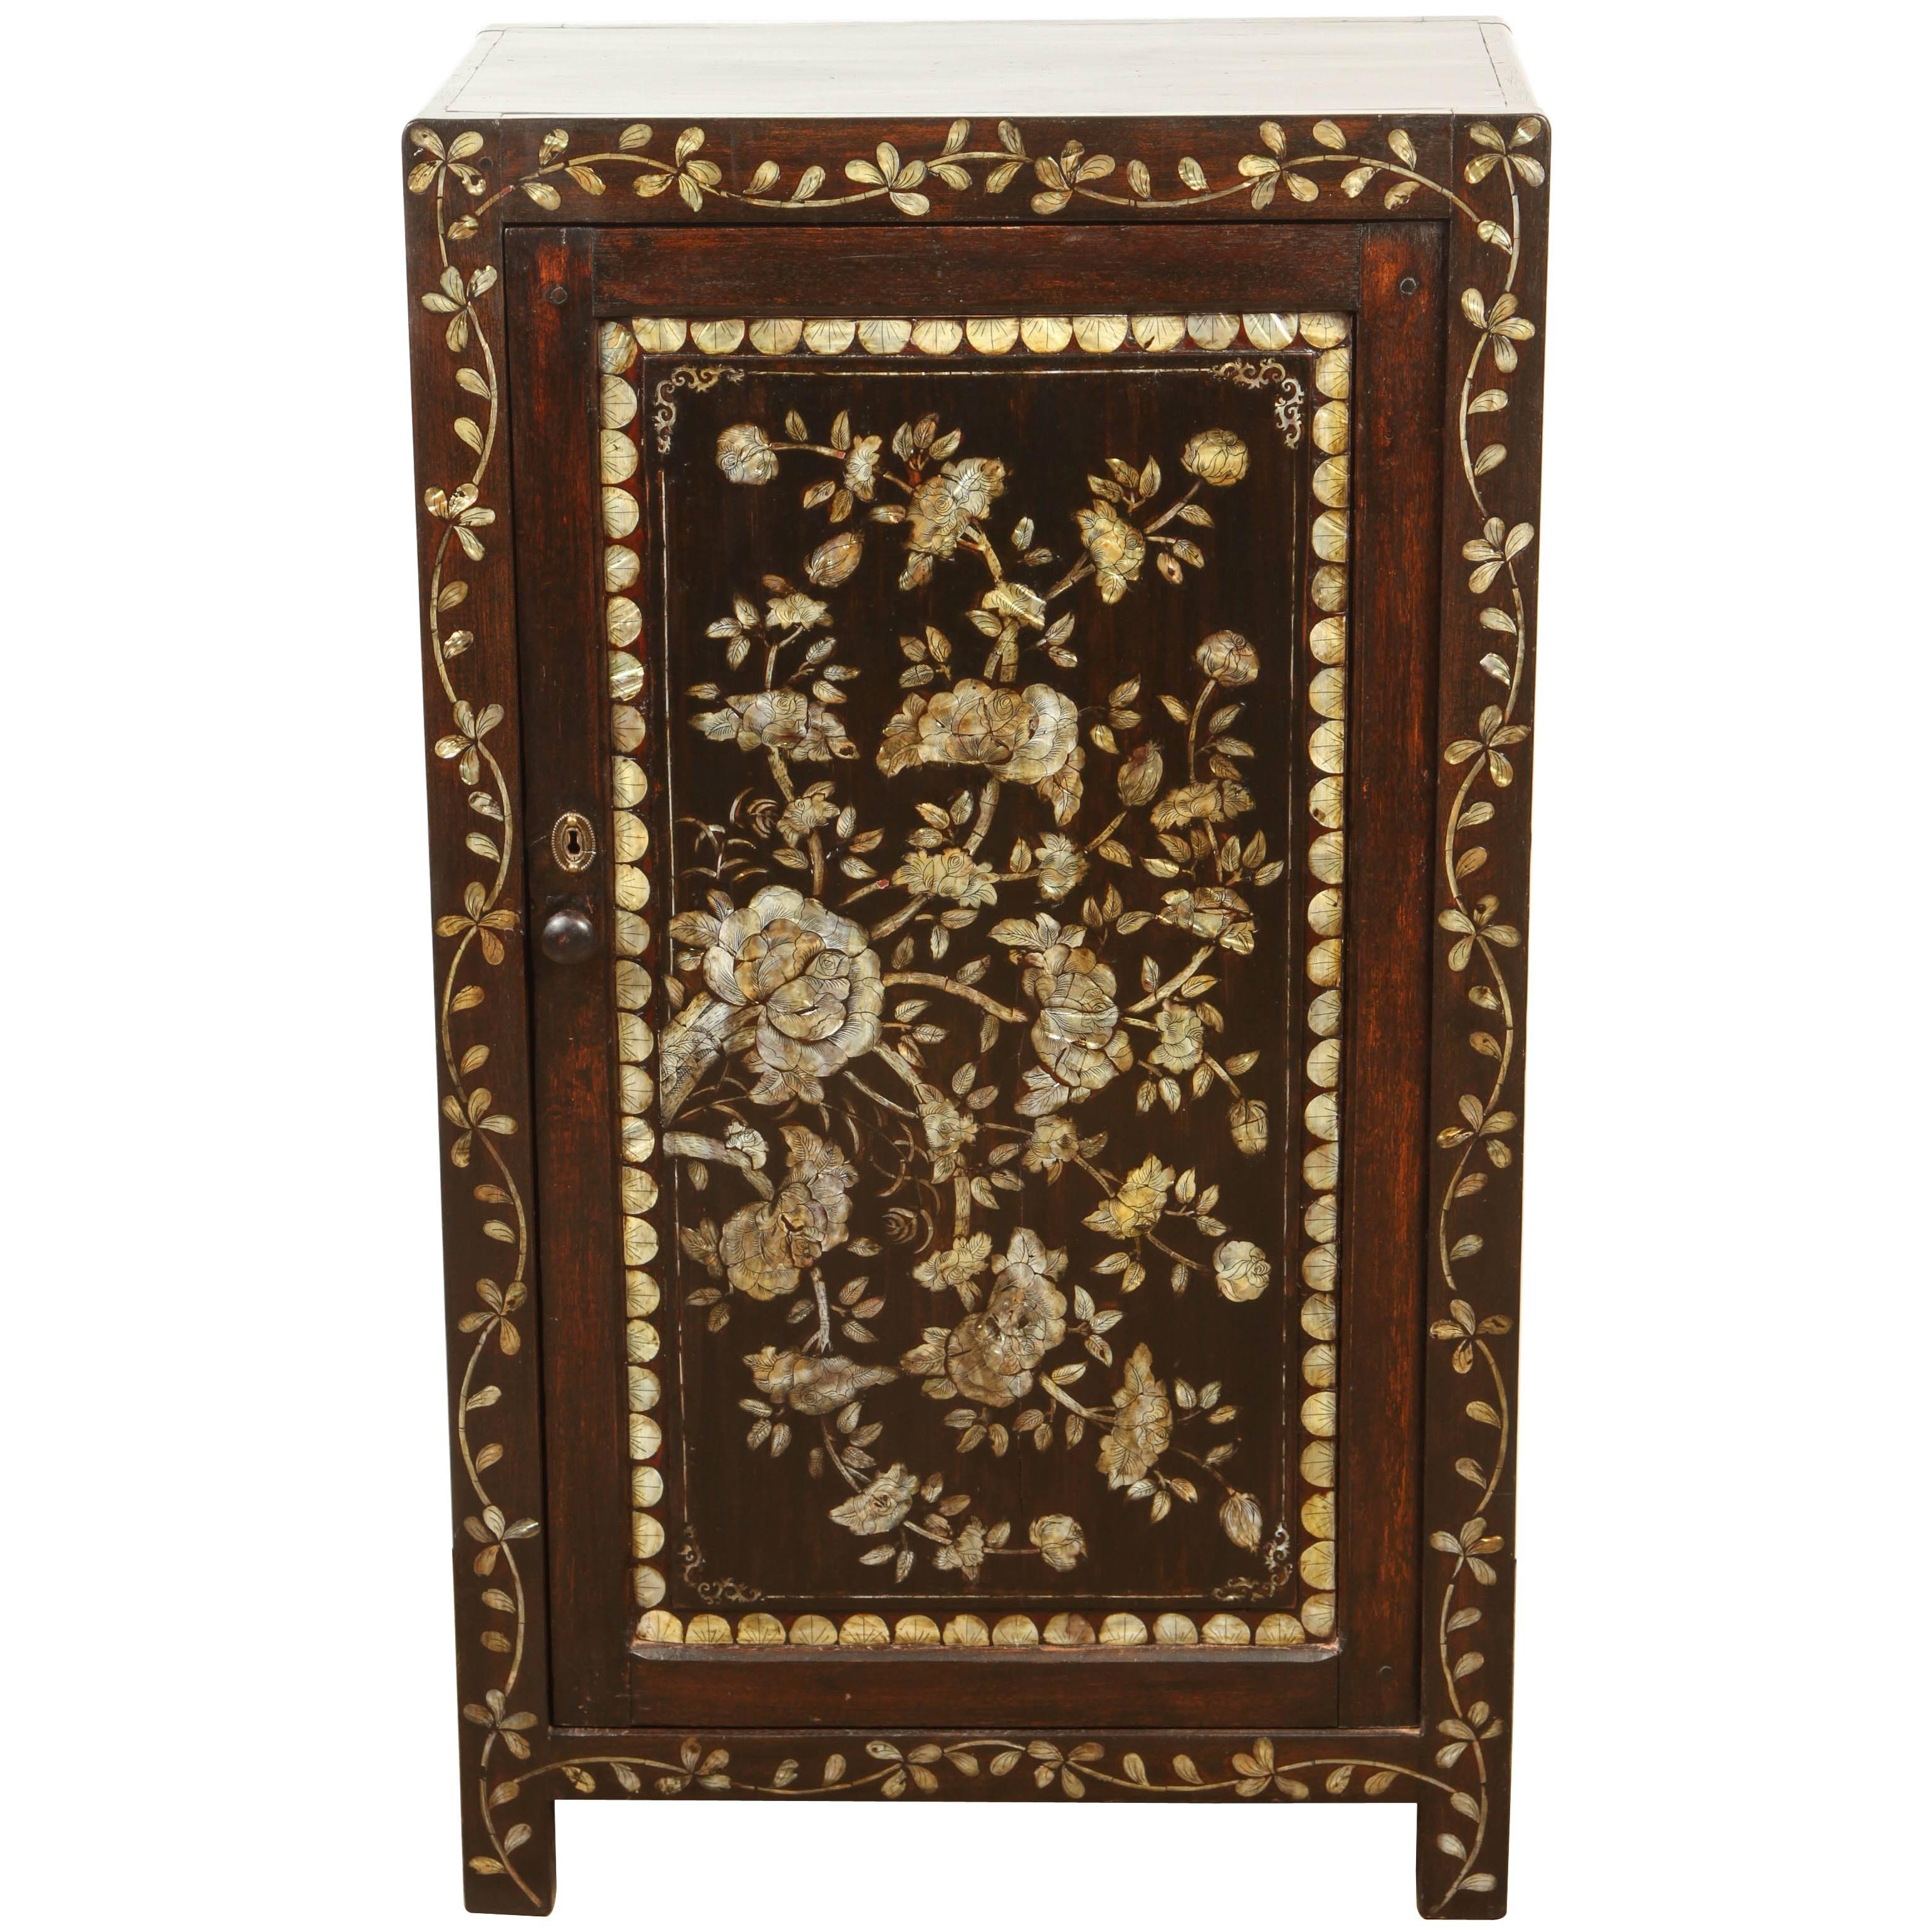 French Colonial Rosewood and Mother-of-Pearl Inlaid Cabinet